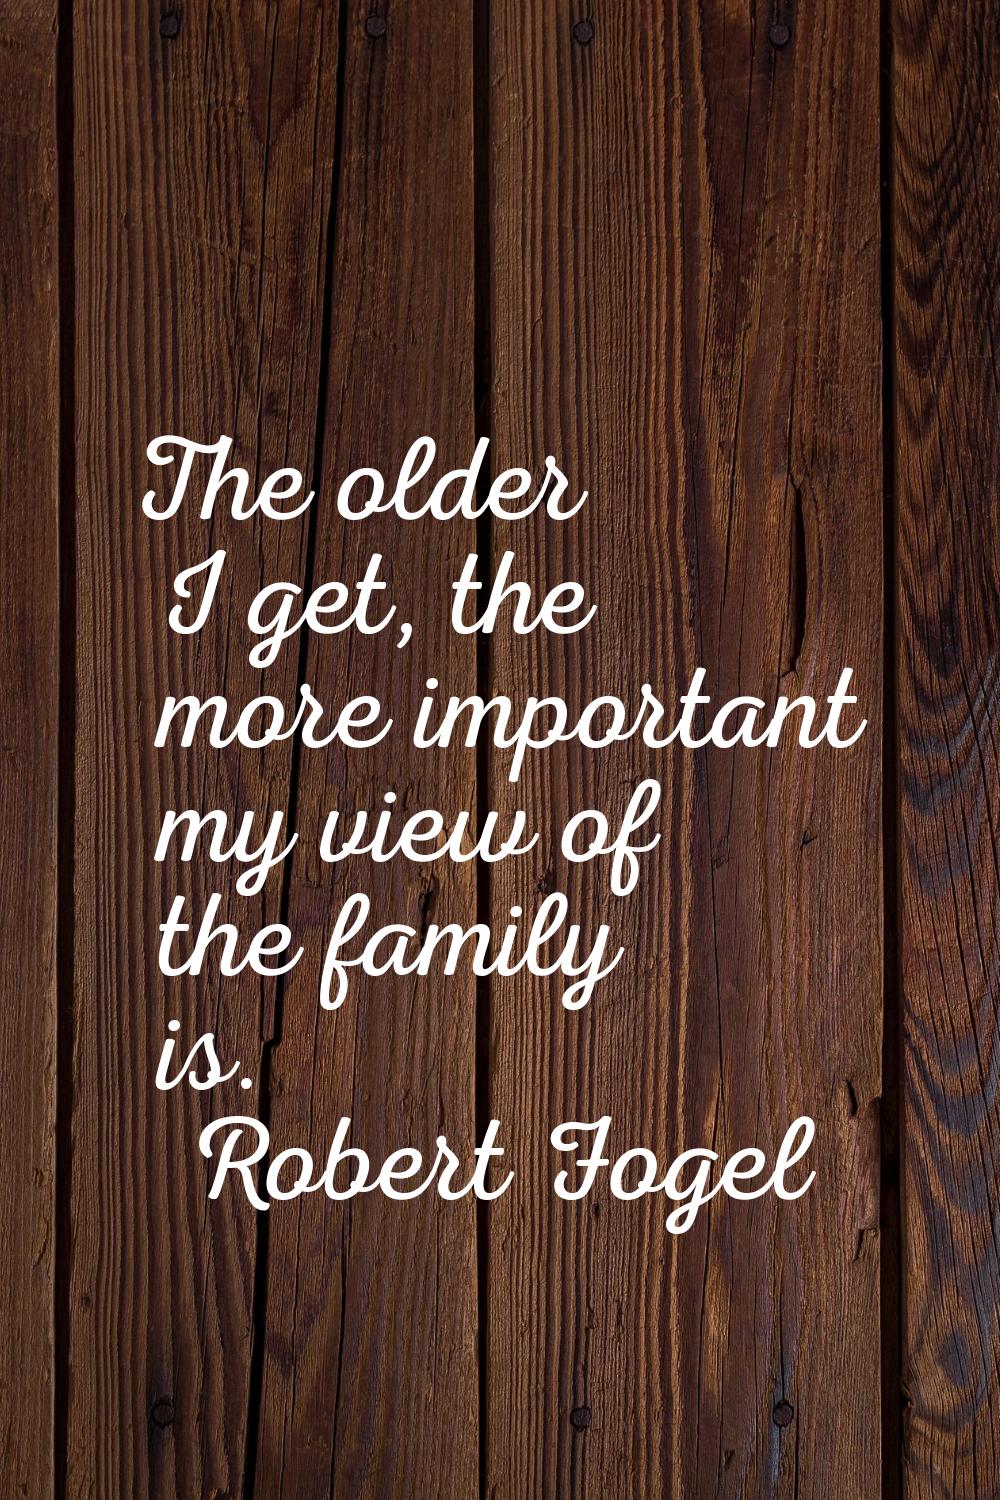 The older I get, the more important my view of the family is.